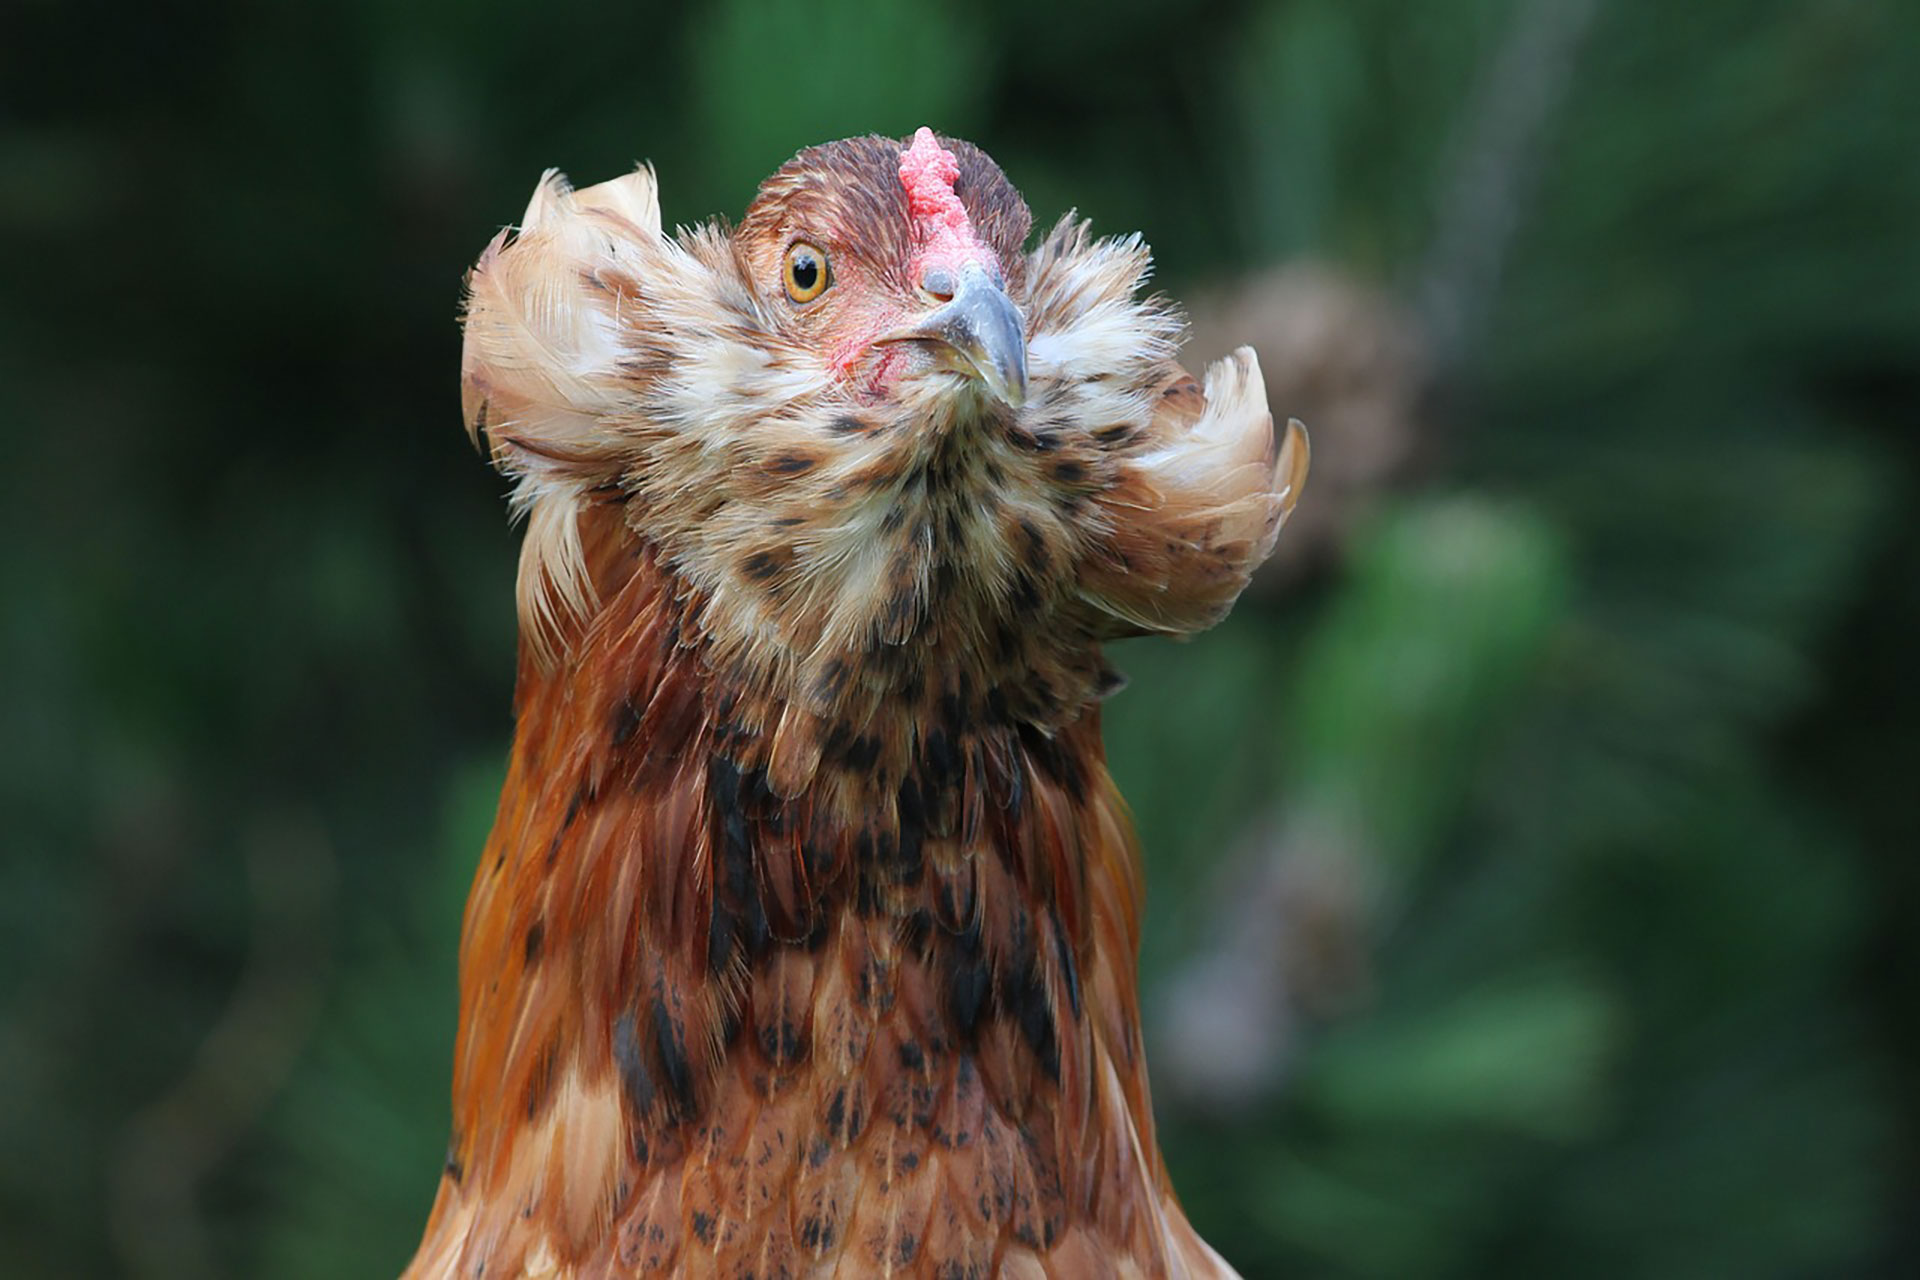 Araucanian chickens are extremely docile, which is why they have been taken as pets / (Pexels)